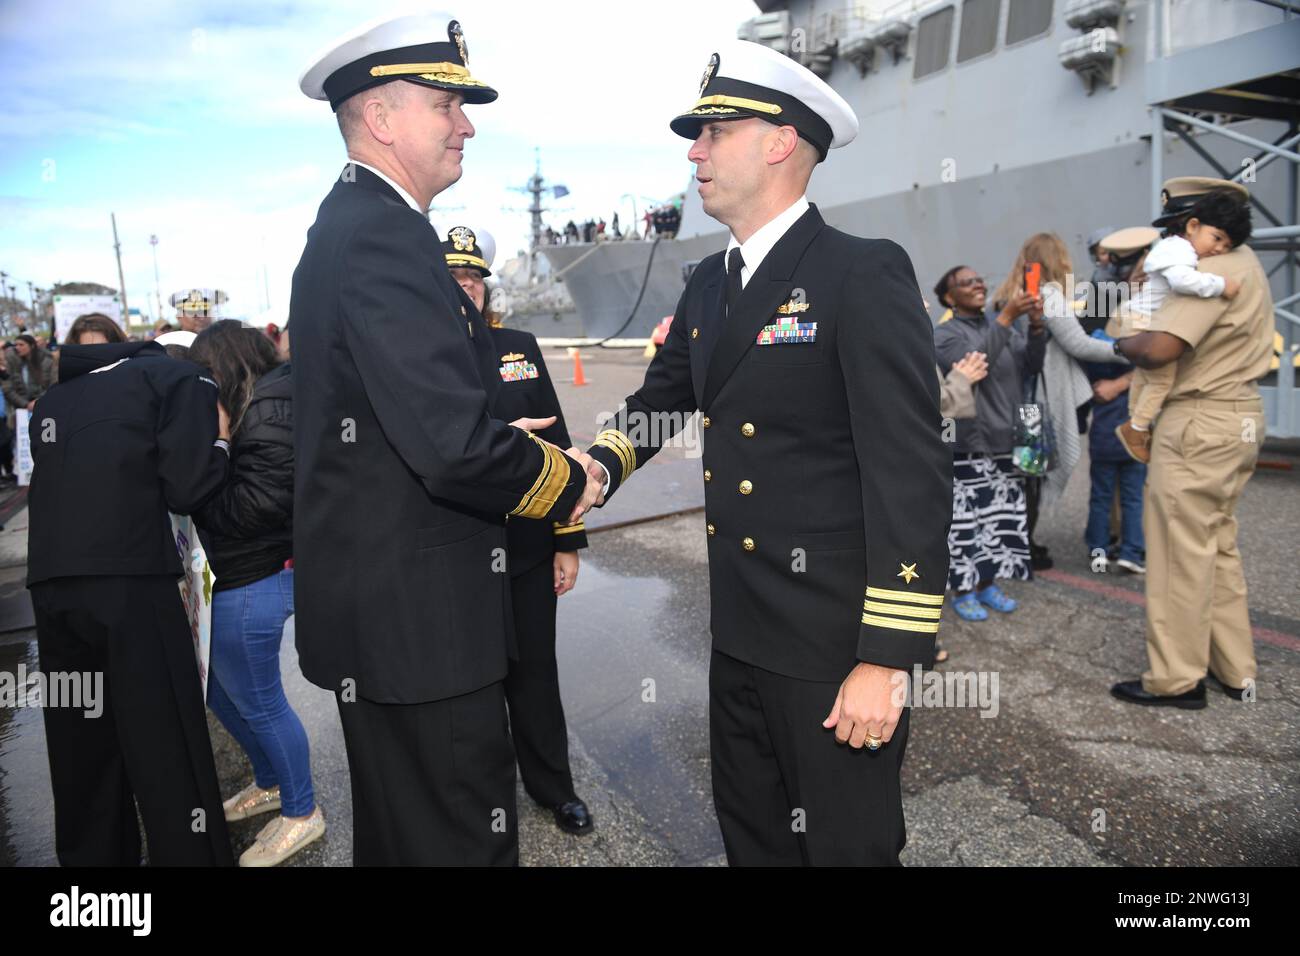 230212-N-DB801-0041  MAYPORT, Fla. – (Feb. 12, 2023) -- Rear Adm. Jim Aiken, Commander, U.S. Naval Forces Southern Command/U.S. 4th Fleet, left, welcomes home Cmdr. James Diefenderfer, Jr., Commanding Officer, USS The Sullivans (DDG 68), following the ship’s return from a four-month deployment to Naval Station Mayport, Fla., Feb. 12, 2023. Aiken presented Diefenderfer with a Meritorious Unit Commendation (MUC) medal for his ship’s sustained superior performance from Oct. 26, 2022 to Jan. 22, 2023, having consistently provided a combat-ready force to U.S. Central Command, deployed in response t Stock Photo